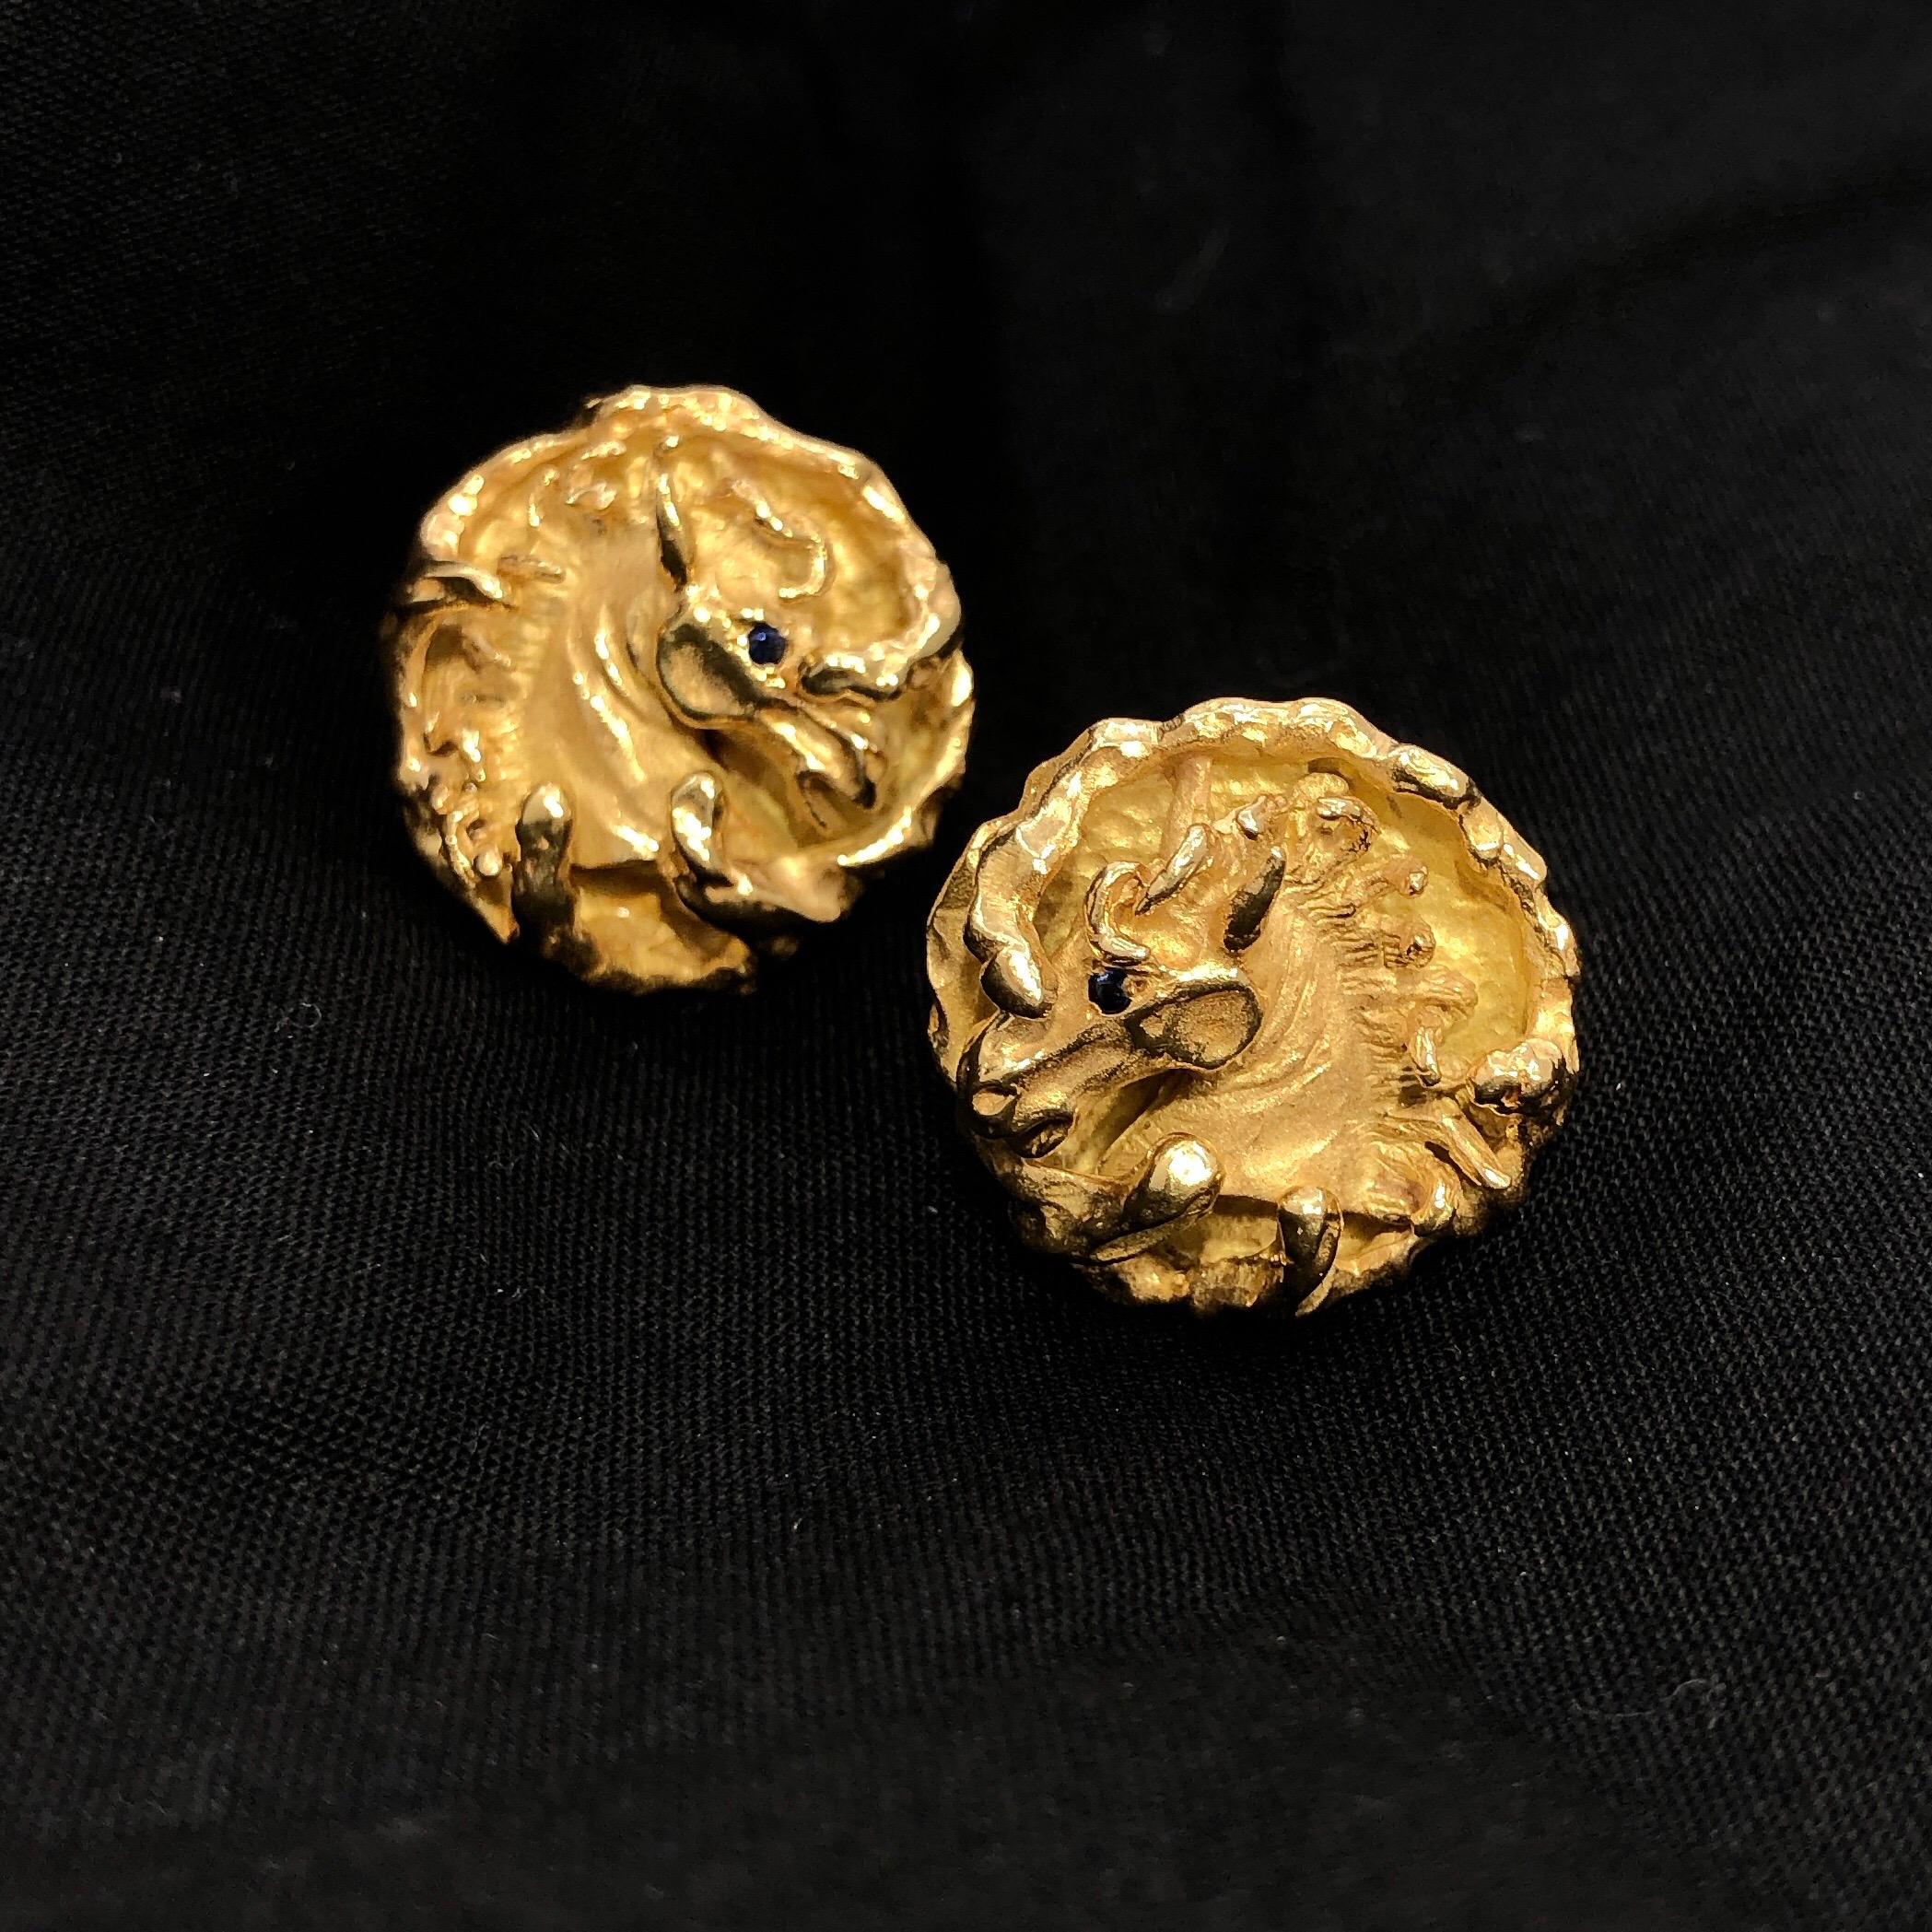 These lovely 18k gold cuff links weighing 42.2 grams and  created in the USA are an excellent example of the powerful depictions characteristic of 1960's design. Each link features a gorgeous horse head with rich blue sapphire eye surrounded by free